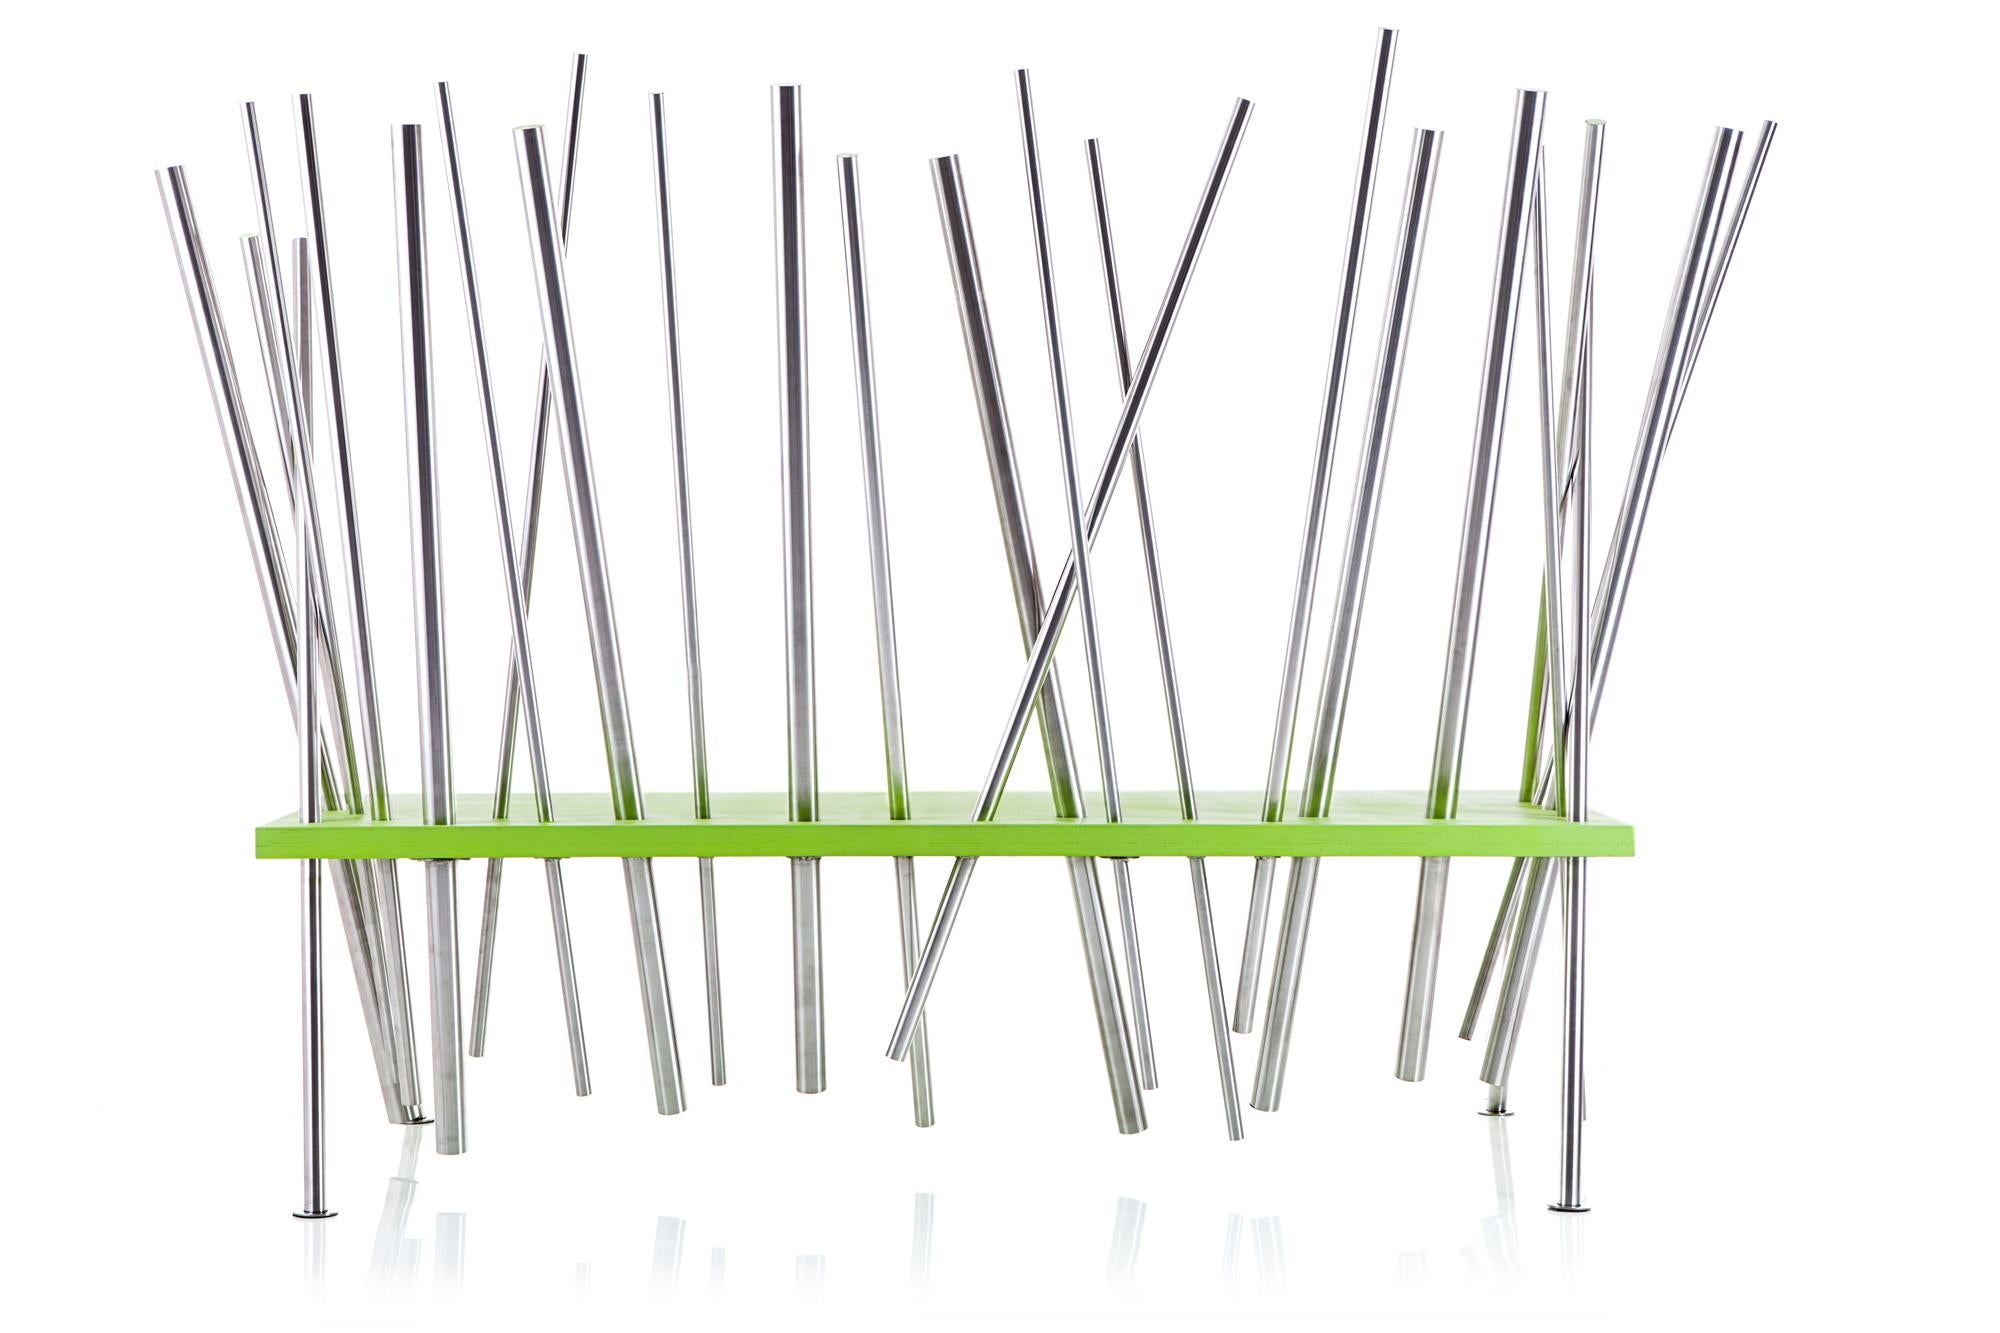 Verdaço - Bench sculpture by Cultivado Em Casa
Dimensions: 197 x 79 x 133 cm
Materials: Stainless steel and wood

A tangle chaotic and, at the same time, systematic, meticulous. Verdaço is green, it is natural. A nest that embraces, shelters,